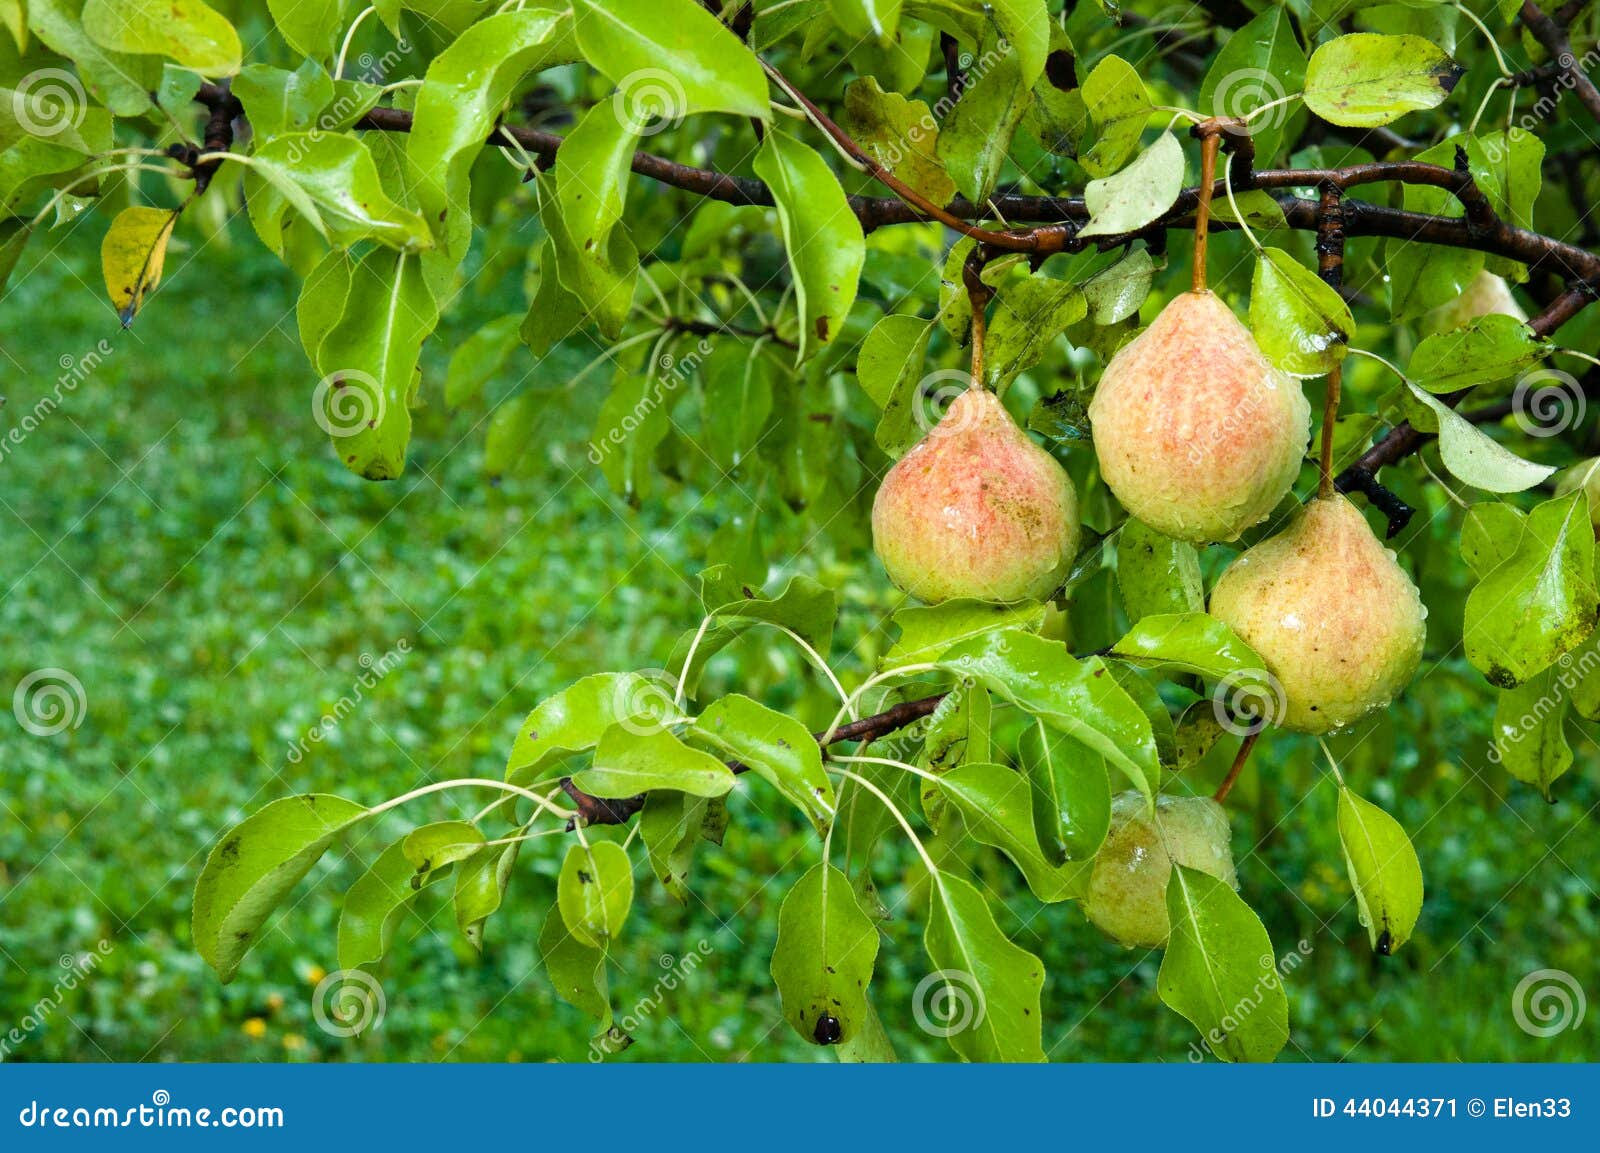 Pears on the tree branches